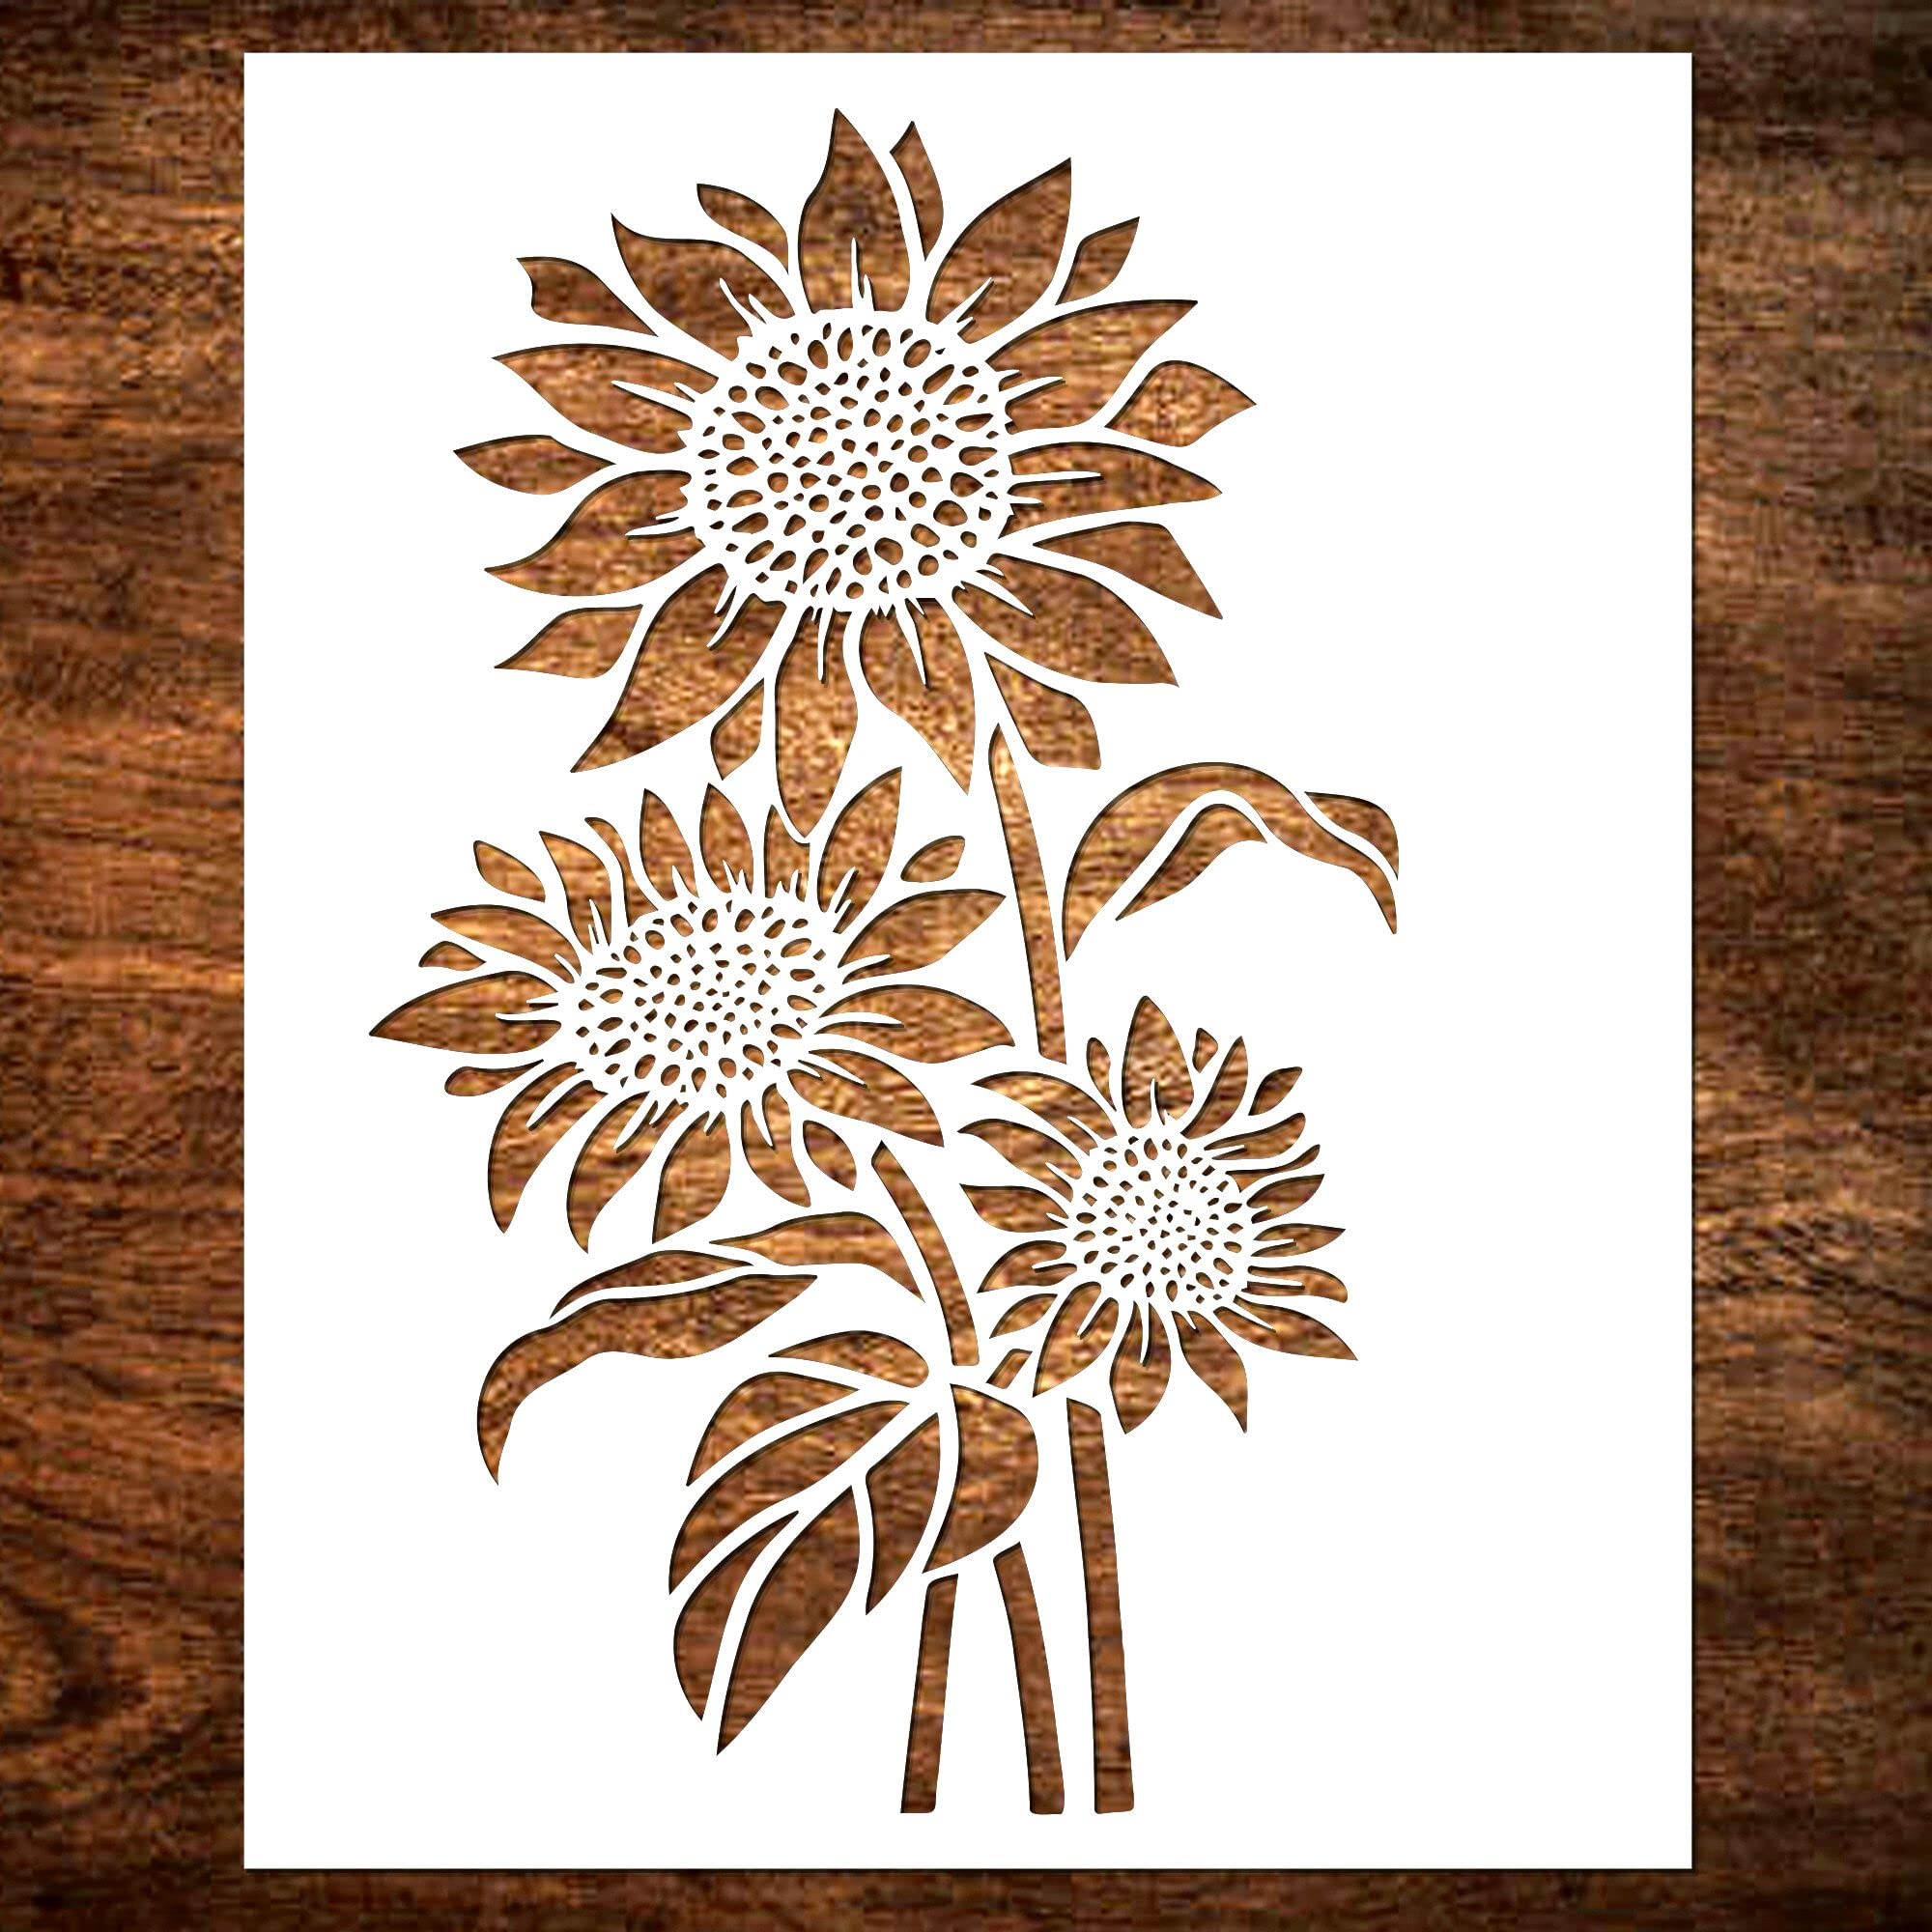 Lily and Dandelion Stencil for Painting on Wood, Canvas, Furniture